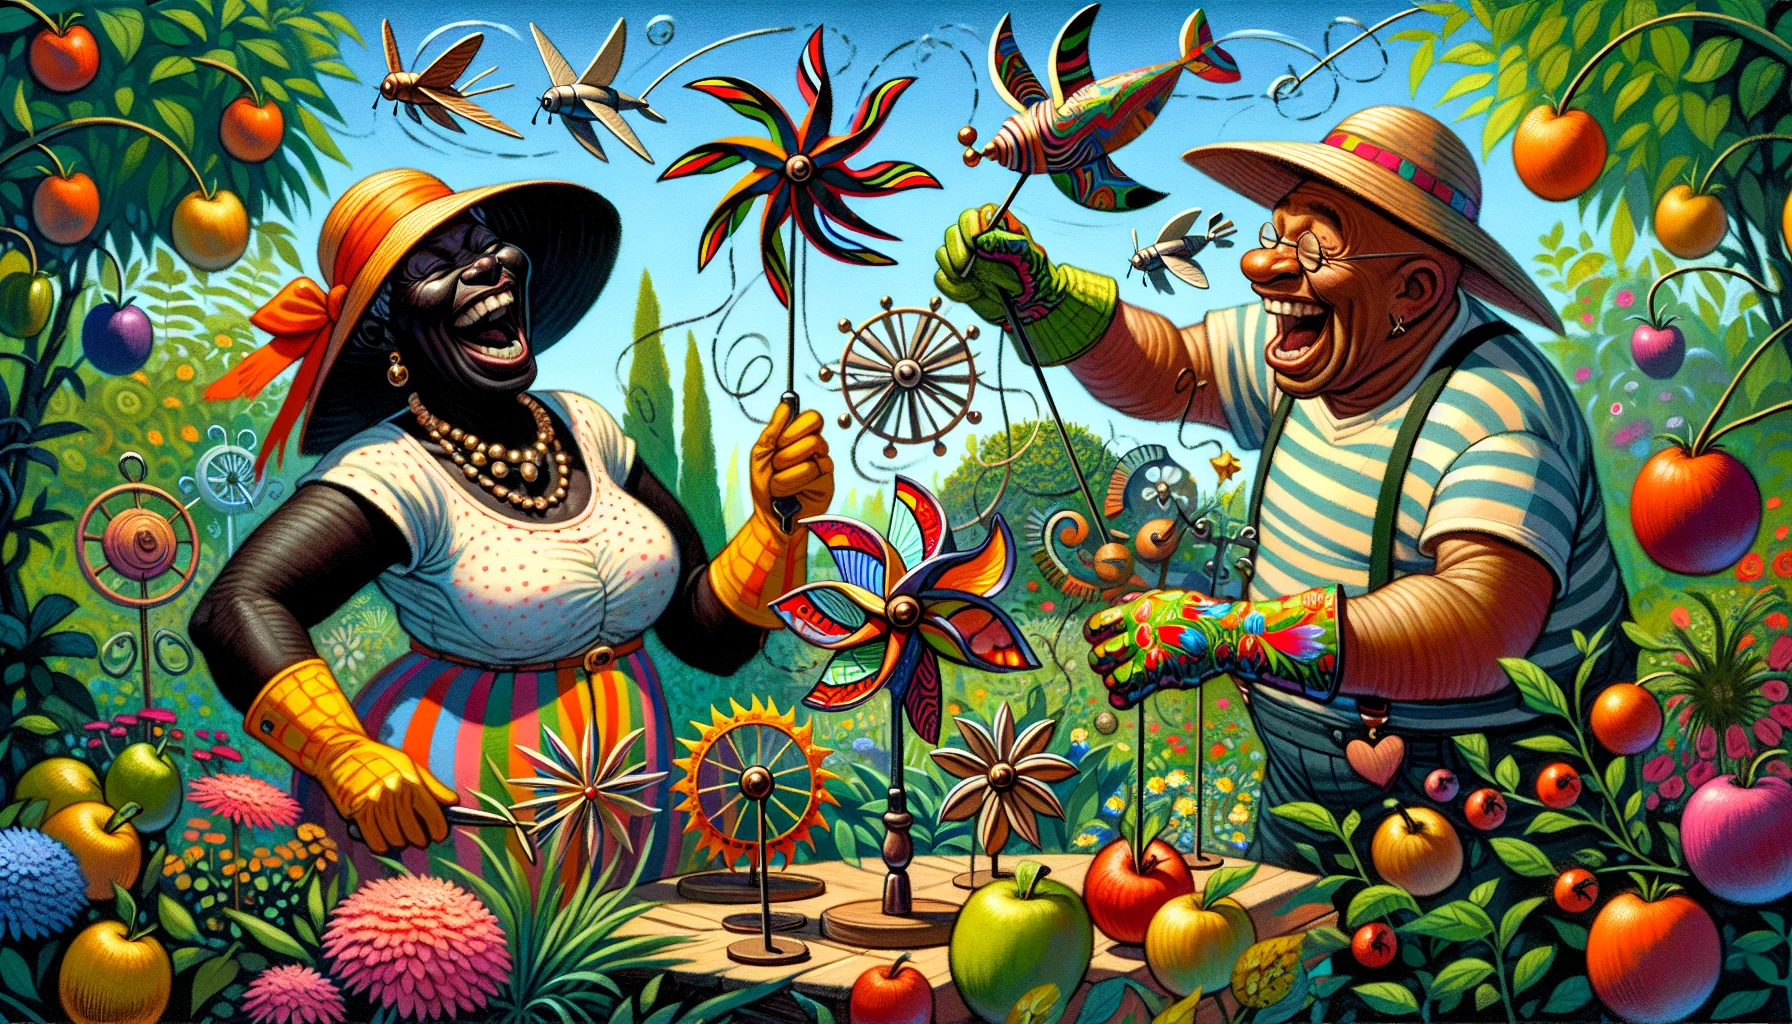 Illustrate a humorous scene taking place in a vibrant and lush garden. In this scenario, a Black woman and a Middle-Eastern man, both wearing colorful garden gloves and sunhats, are engaged in the joyful task of creating whirligigs. Their whirligigs exhibit an extraordinary mix of designs and colors, some resembling unusual animals, others depicting abstract shapes. They're laughing heartily with a playful expression on their faces, their spirited demeanor drawing spectators in, compelling them to join in the delight of gardening. The garden itself is teeming with life - blooming flowers, buzzing bees, fruits silhouette against the clear blue sky contributing to the captivating allure of gardening.